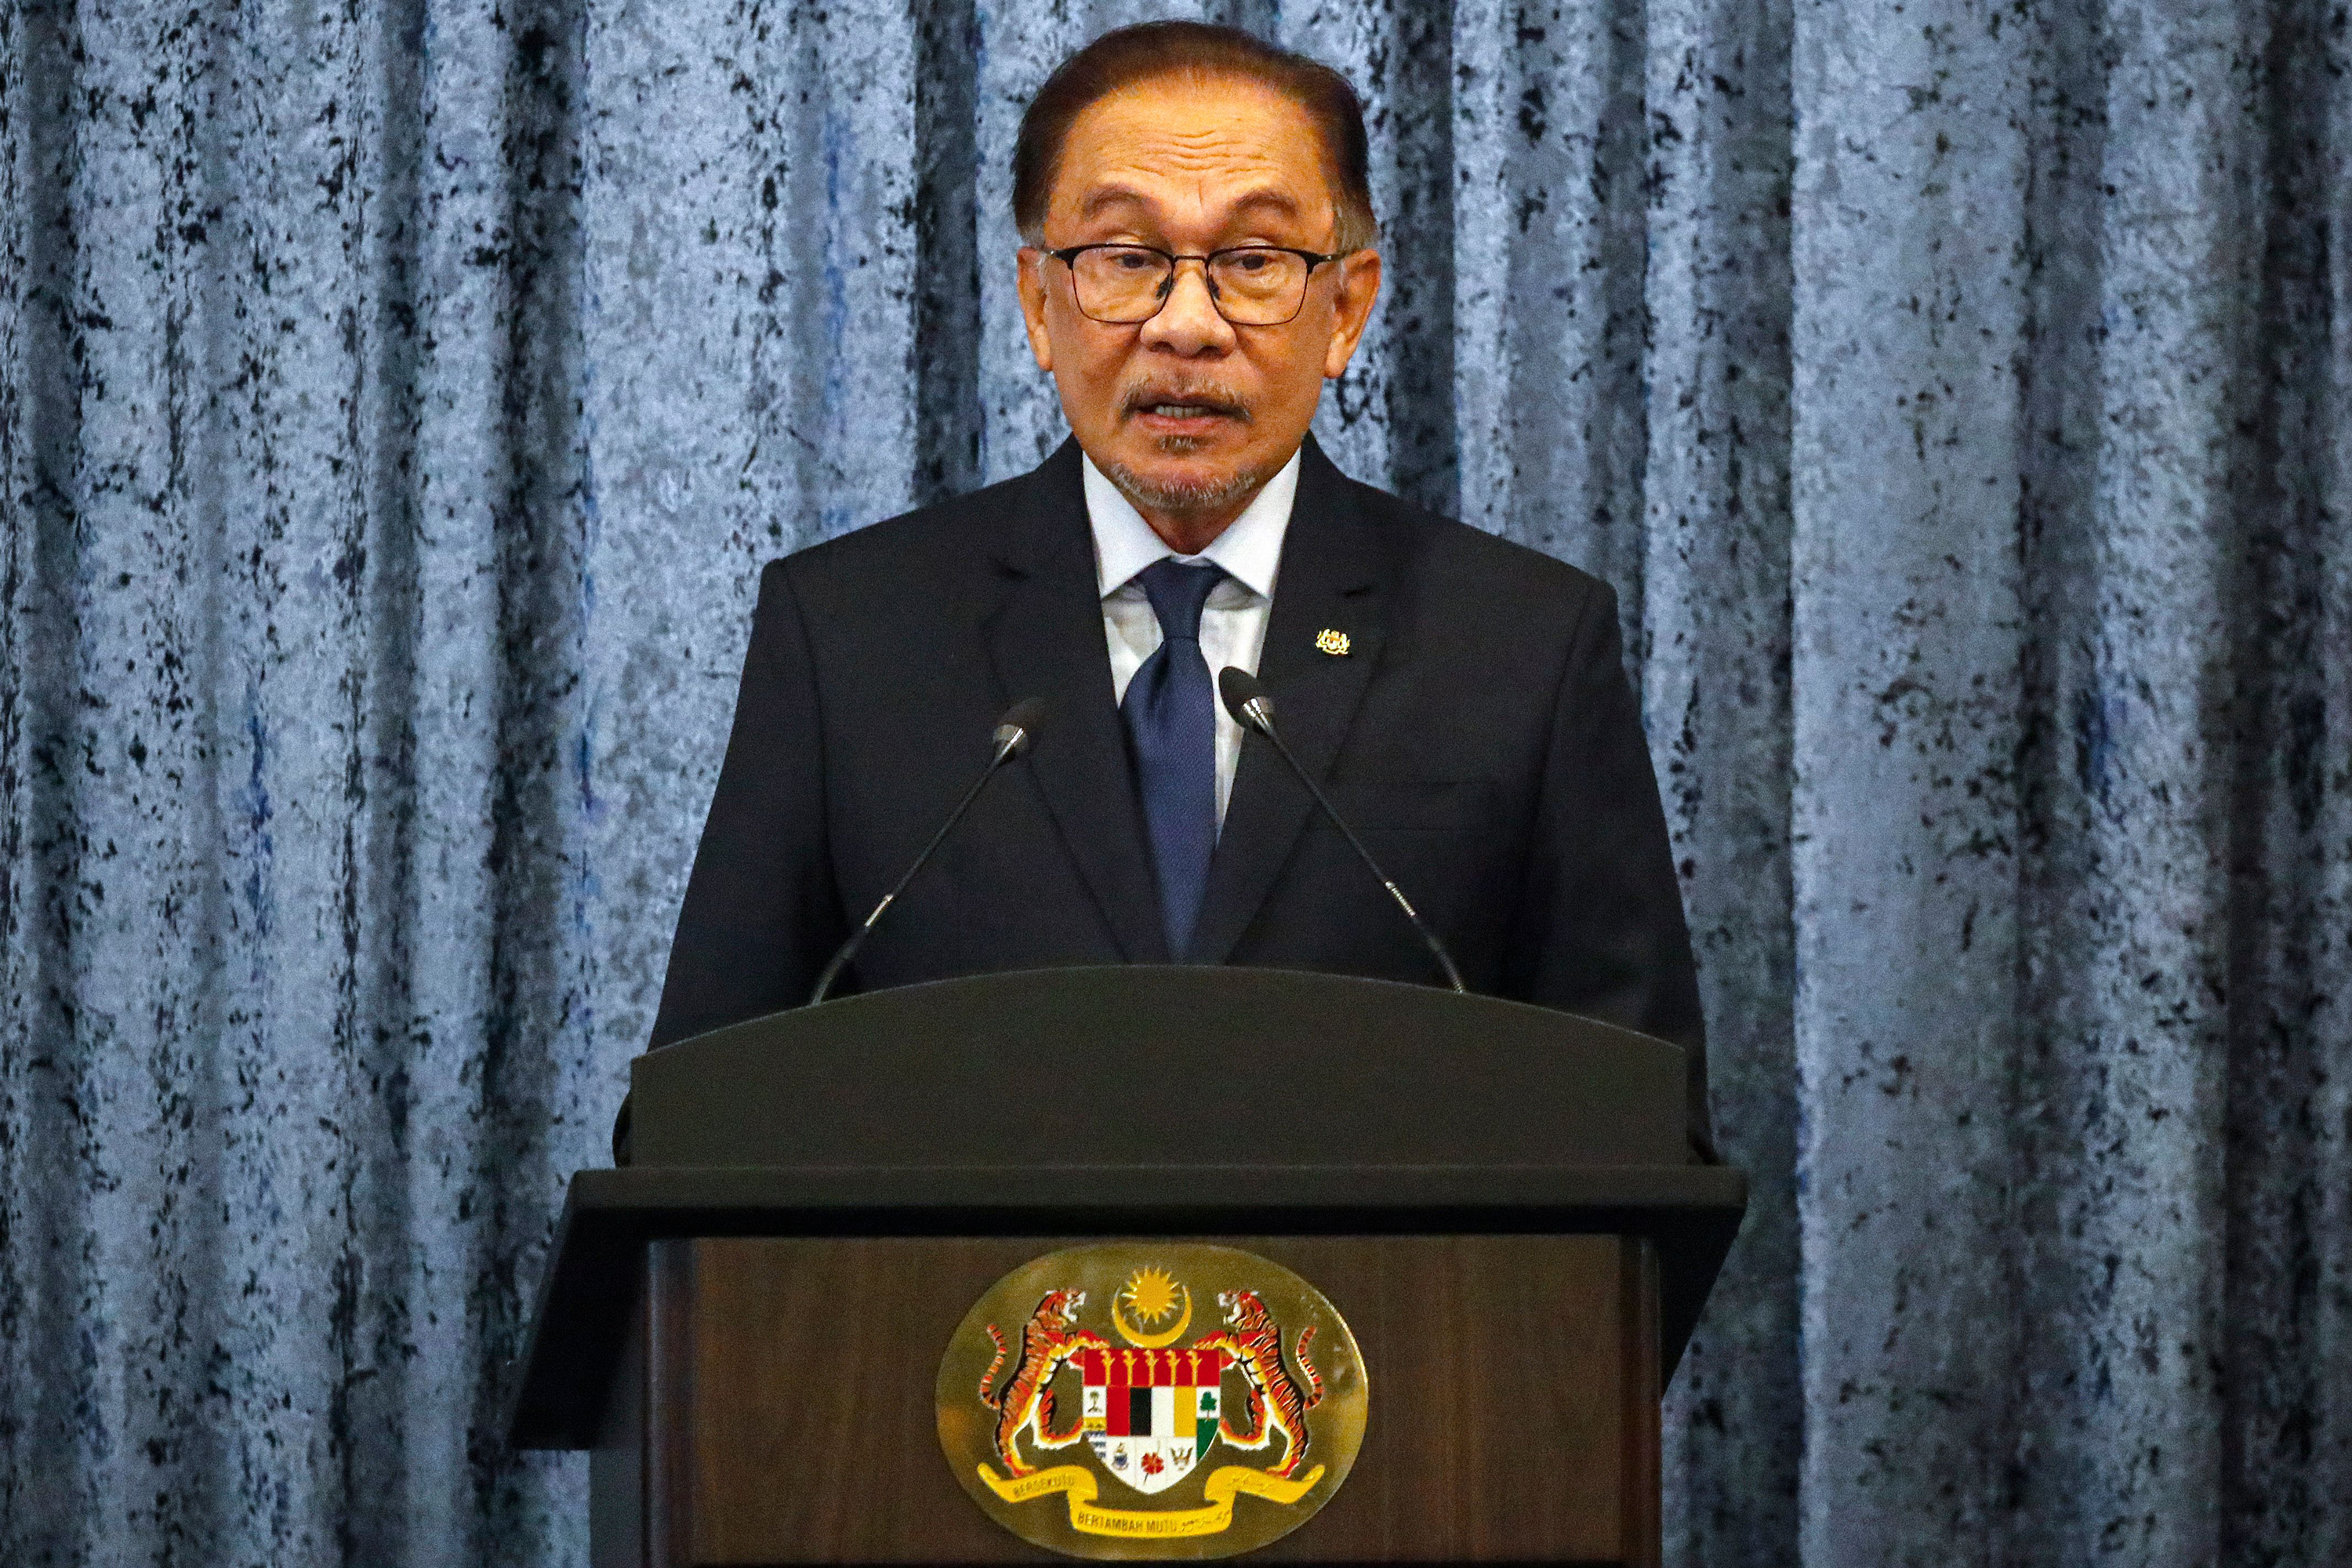 Malaysian Prime Minister Anwar Ibrahim speaks during a news conference in Putrajaya, Malaysia on November 5.